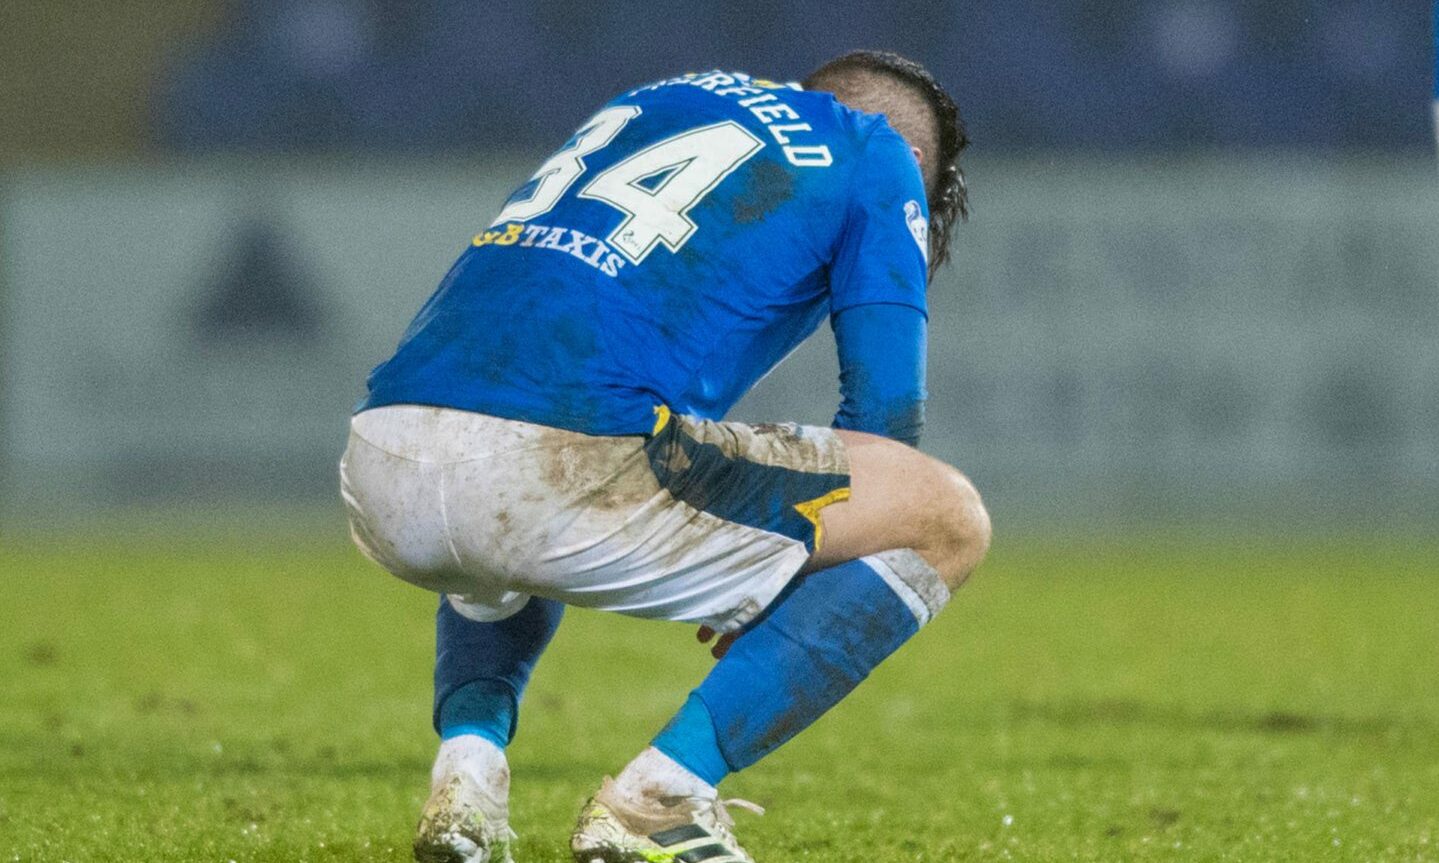 St Johnstone's Jacob Butterfield despairs at full-time after losing against Ross County.